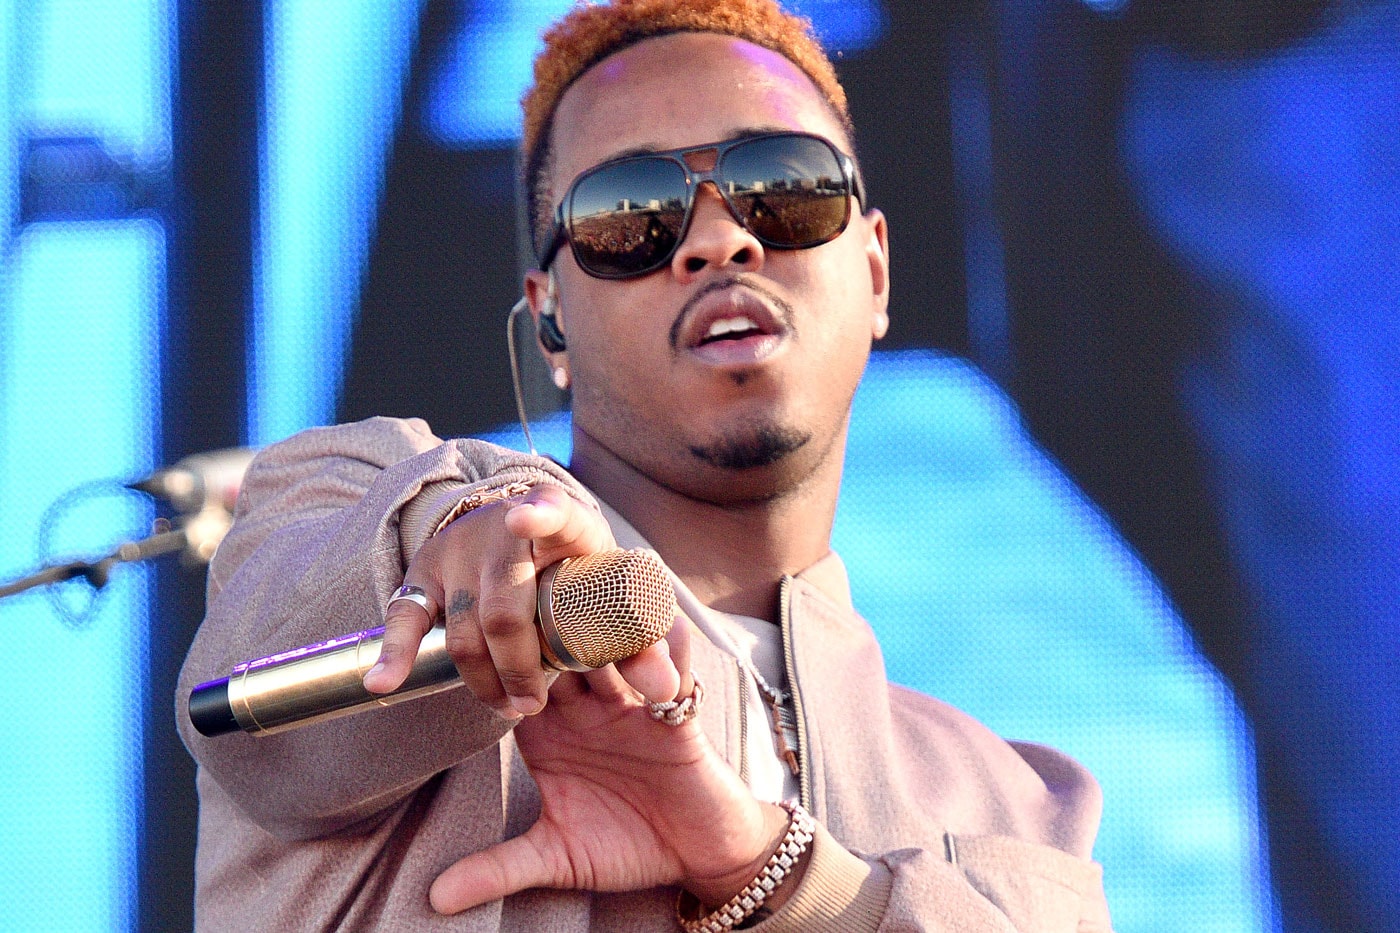 Chance the Rapper & Jeremih Join Puff Daddy's "Bad Boy Family Reunion" Tour